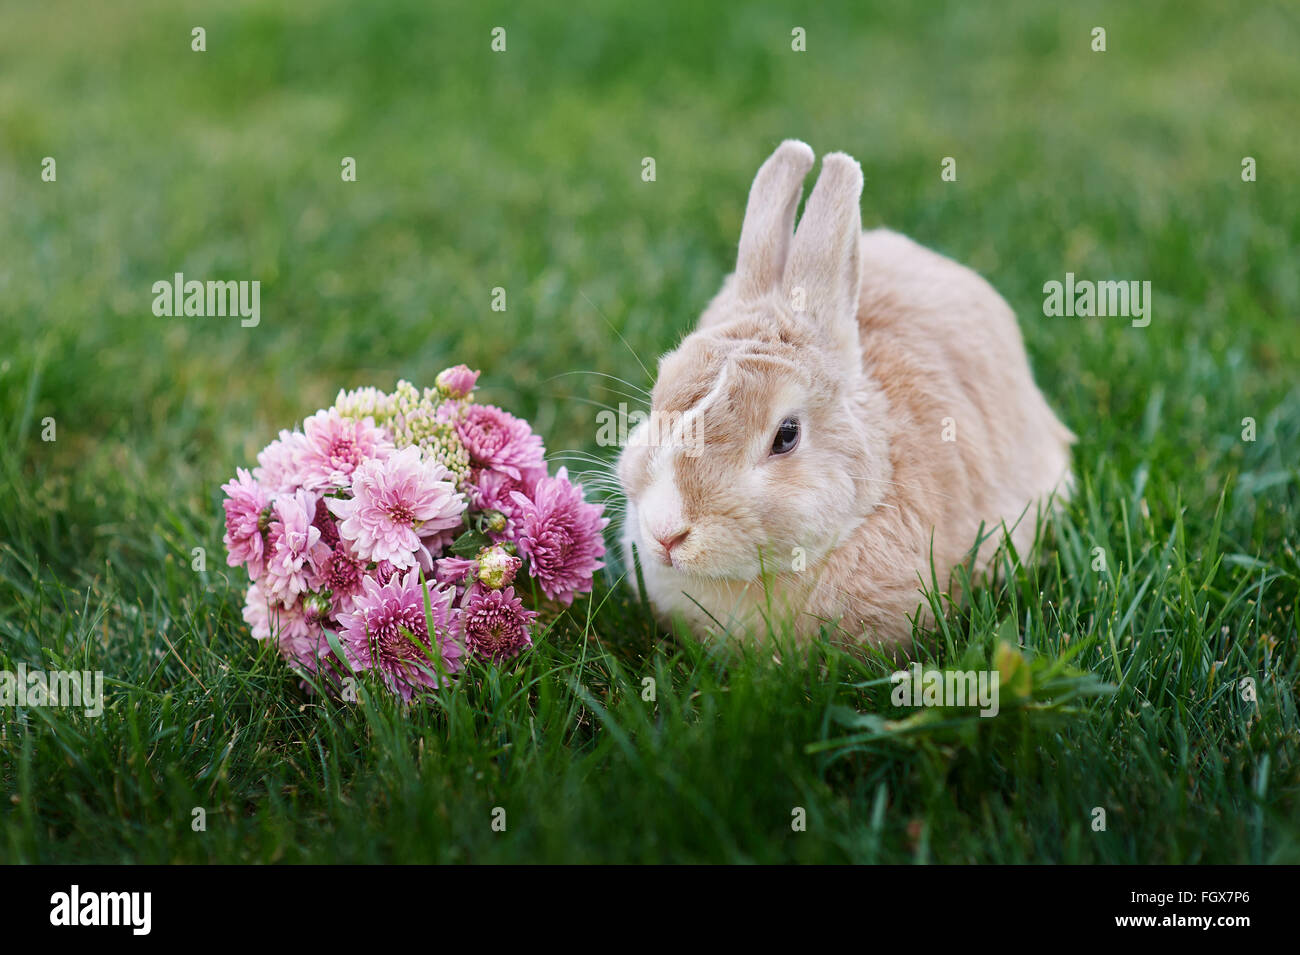 Fluffy bunny and a bouquet of flowers on the grass Stock Photo